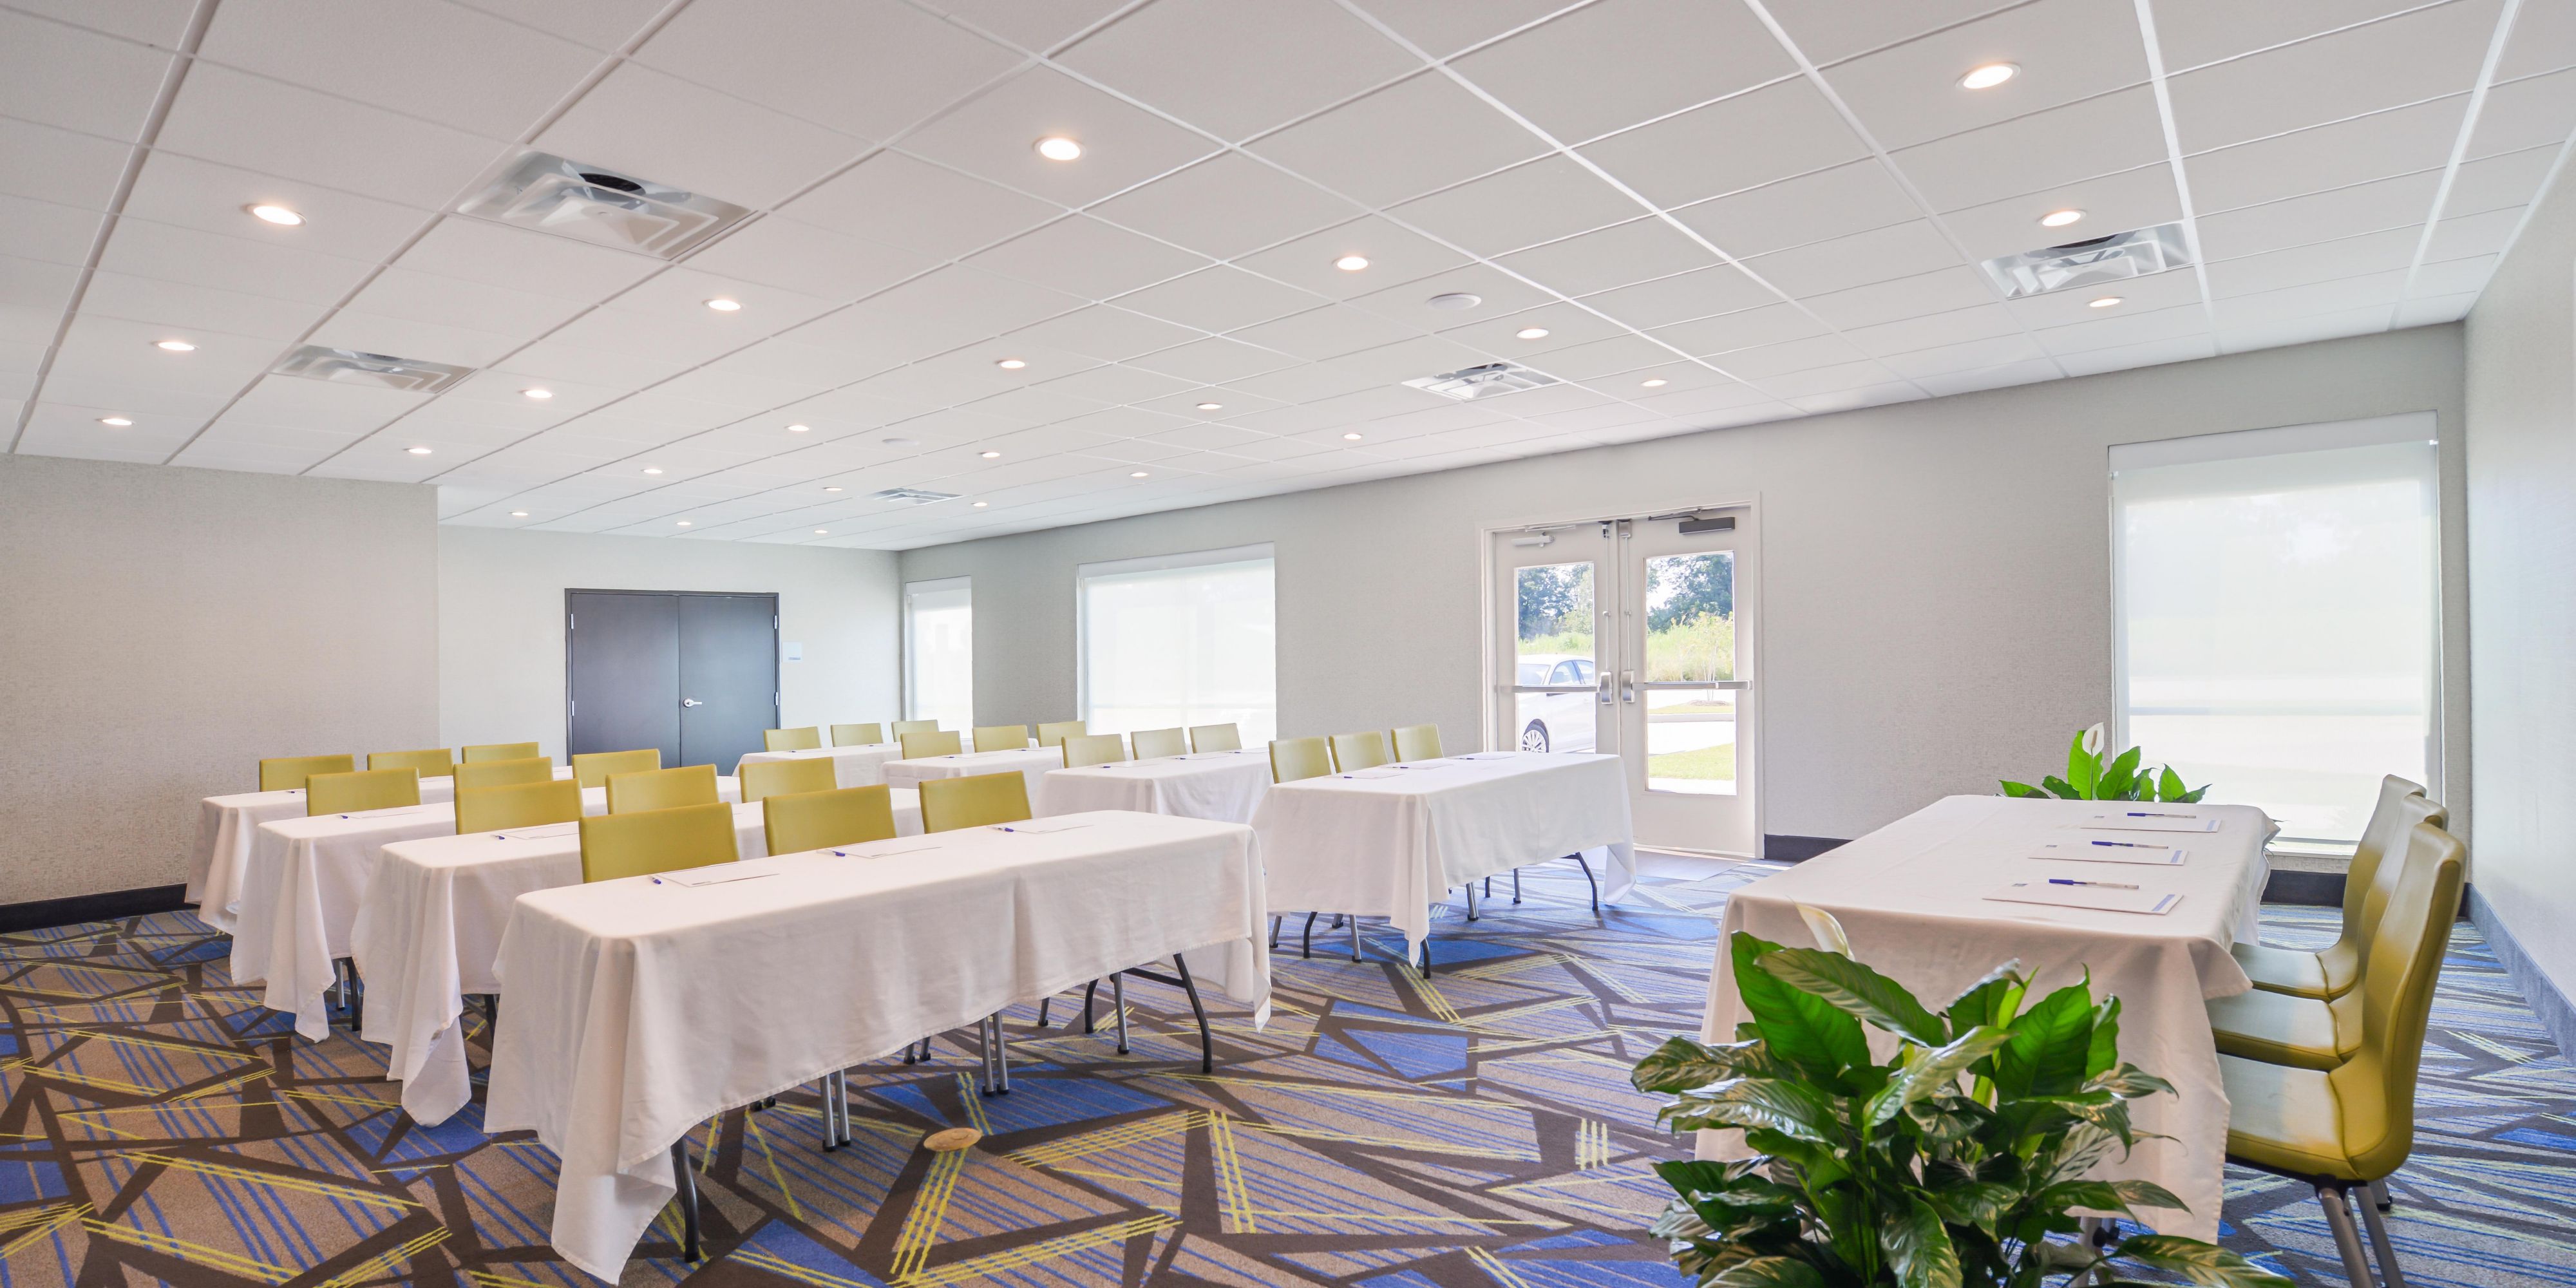 Host your next party, reunion, training class, or event in our Meeting Room.  A comfortable, spacious room equipped to accommodate up to 50 people with numerous seating styles available.  Enjoy your own A/V on our generous-sized television available for hookup.  926 square feet await your group!